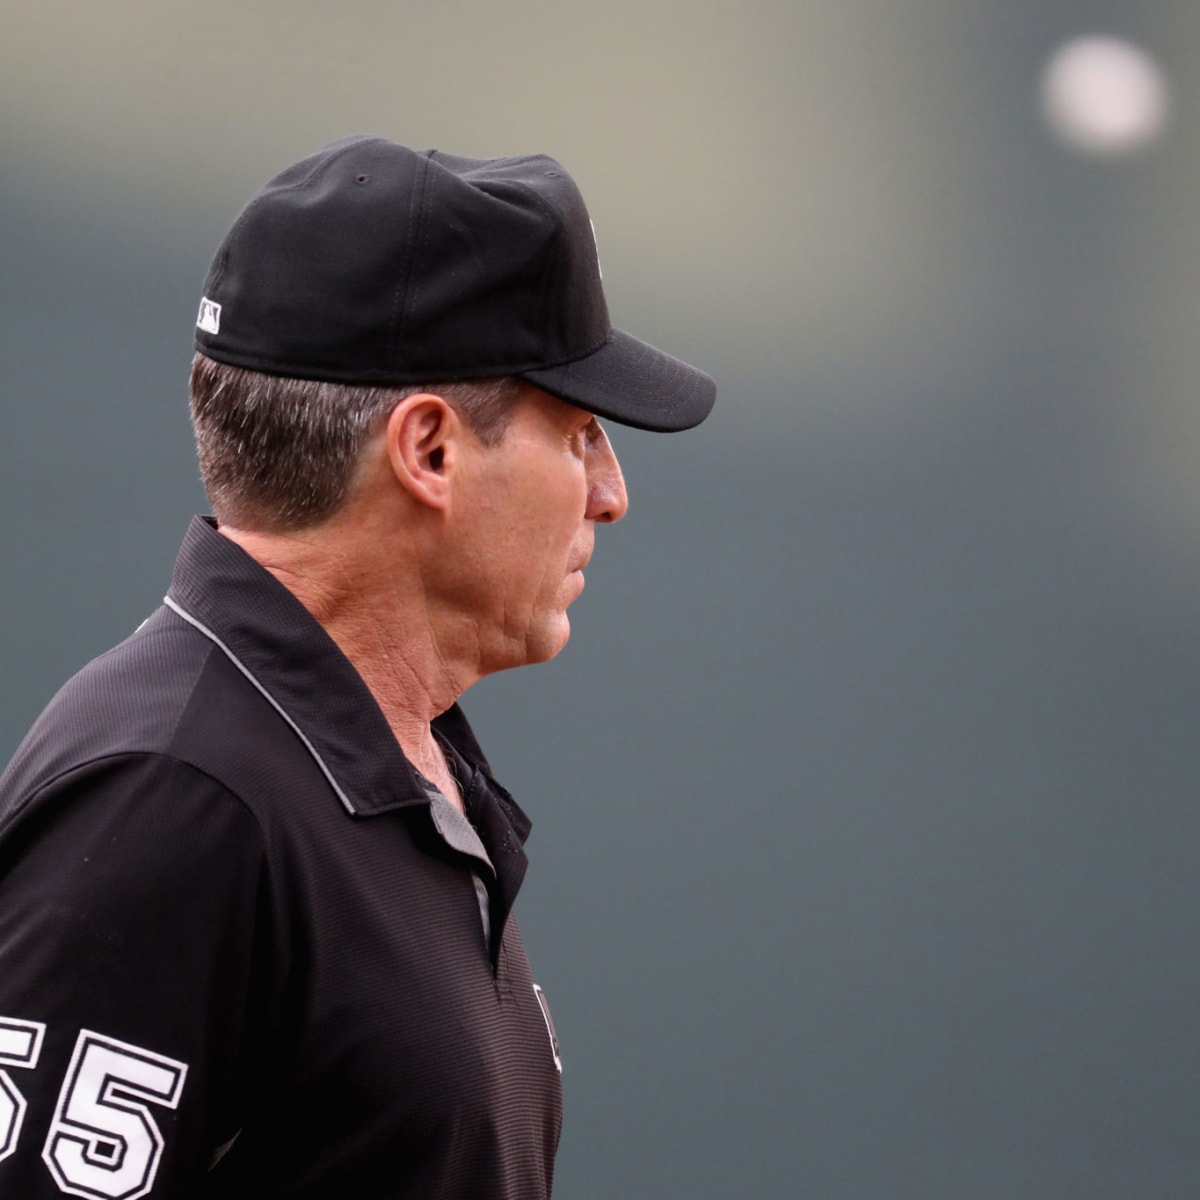 Angel Hernandez claims MLB 'manipulated' year-end reviews of